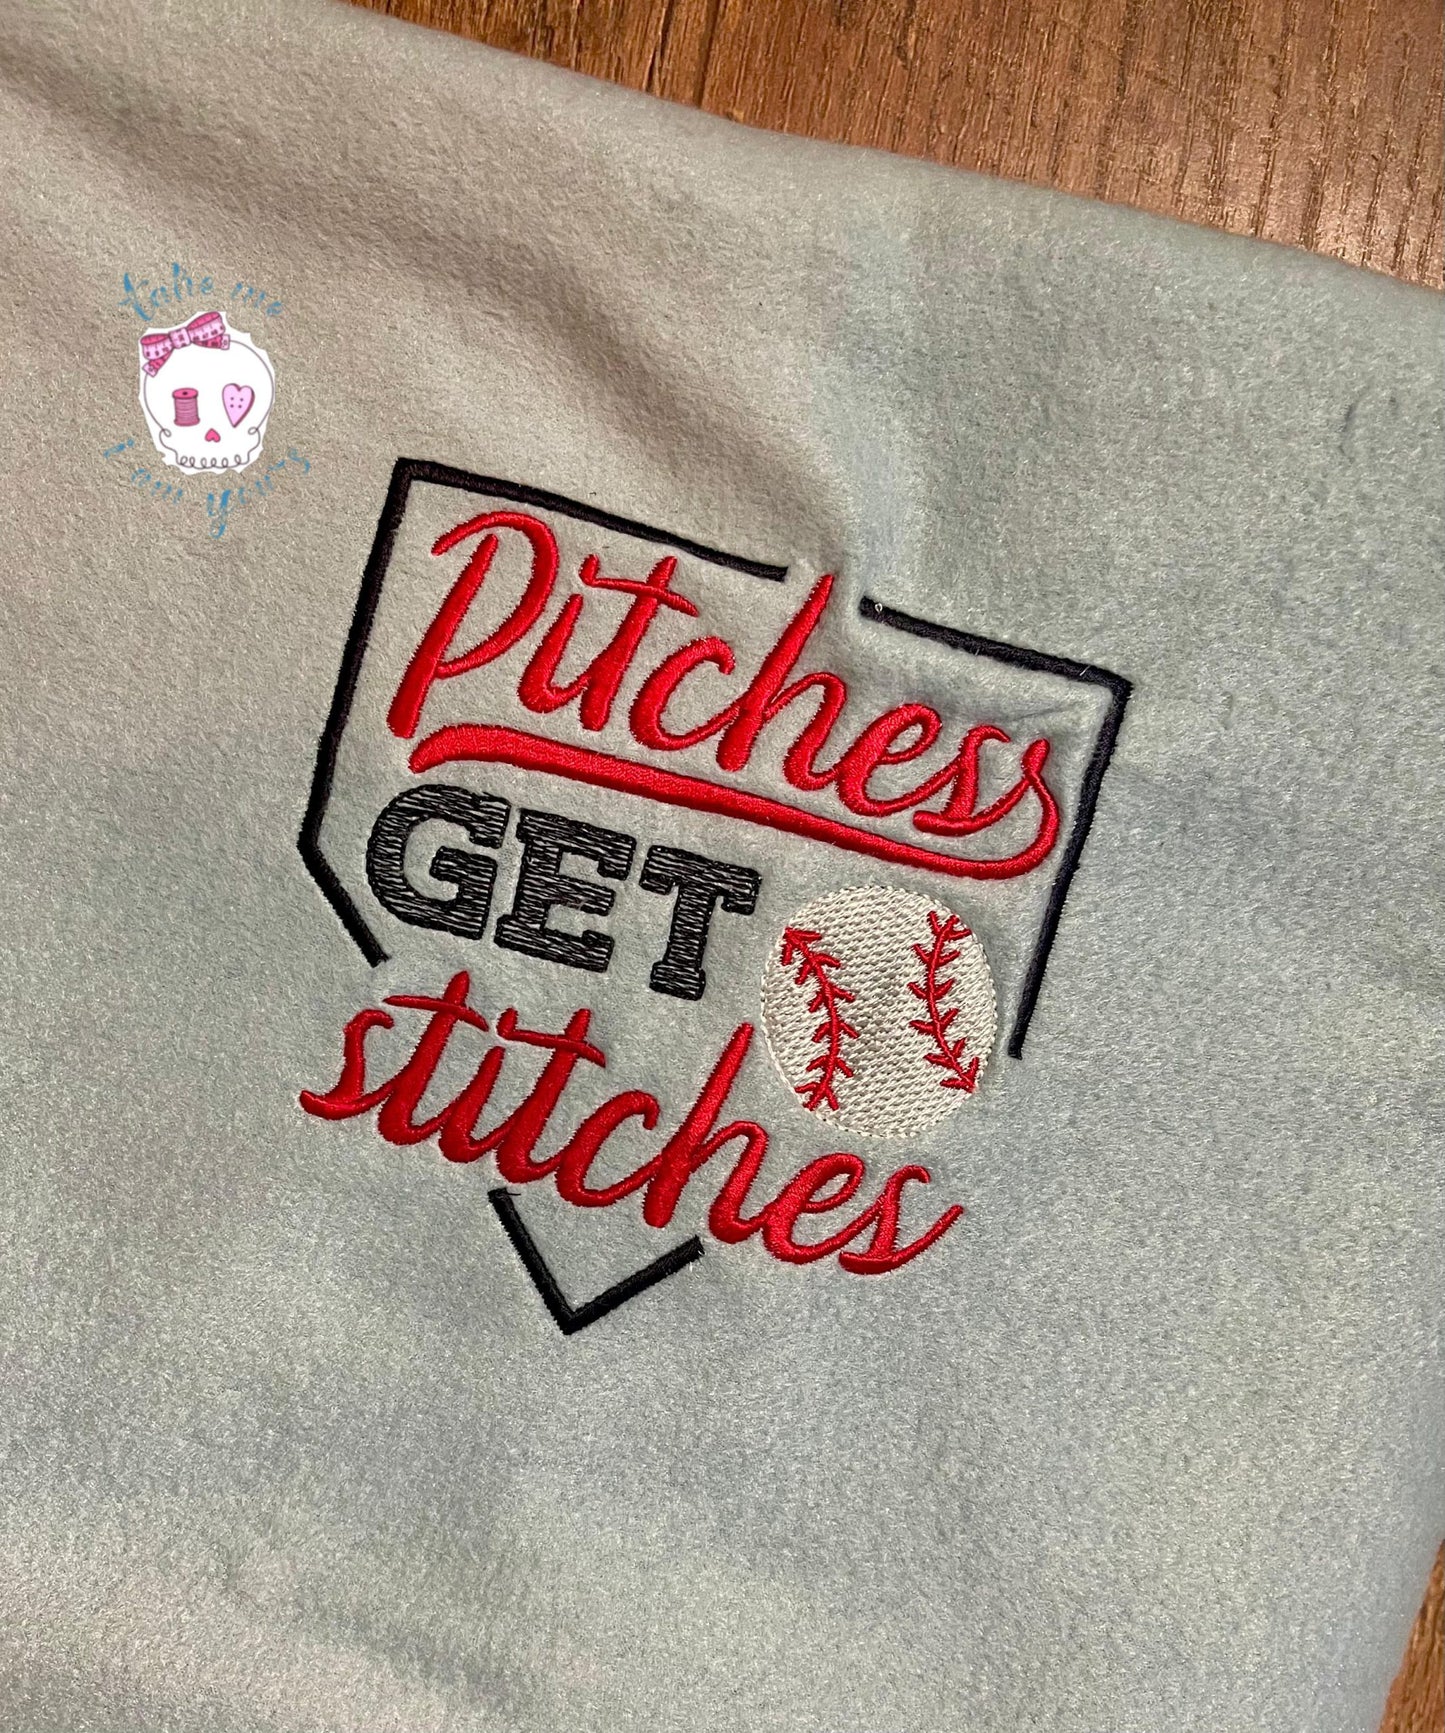 Pitches Get Stitches - 3 sizes- Digital Embroidery Design